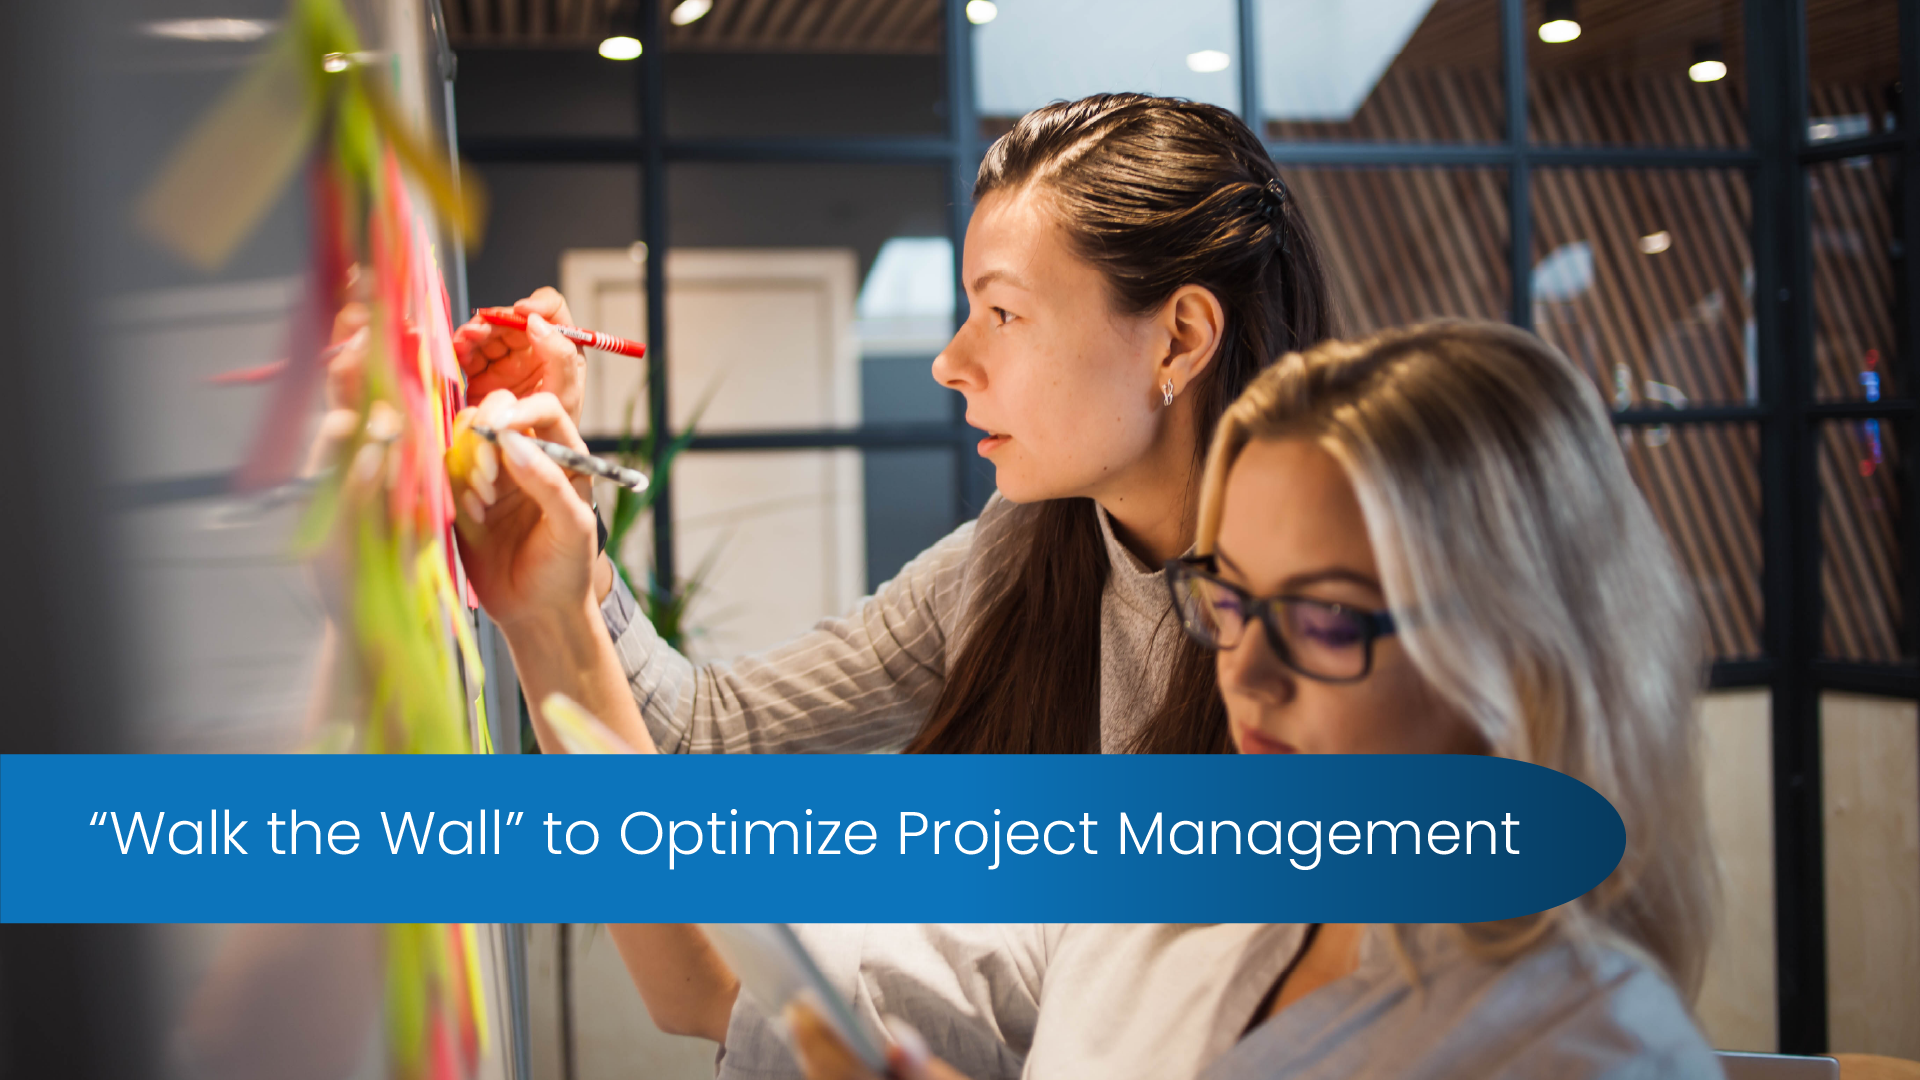 “Walk the Wall” to Optimize Project Management